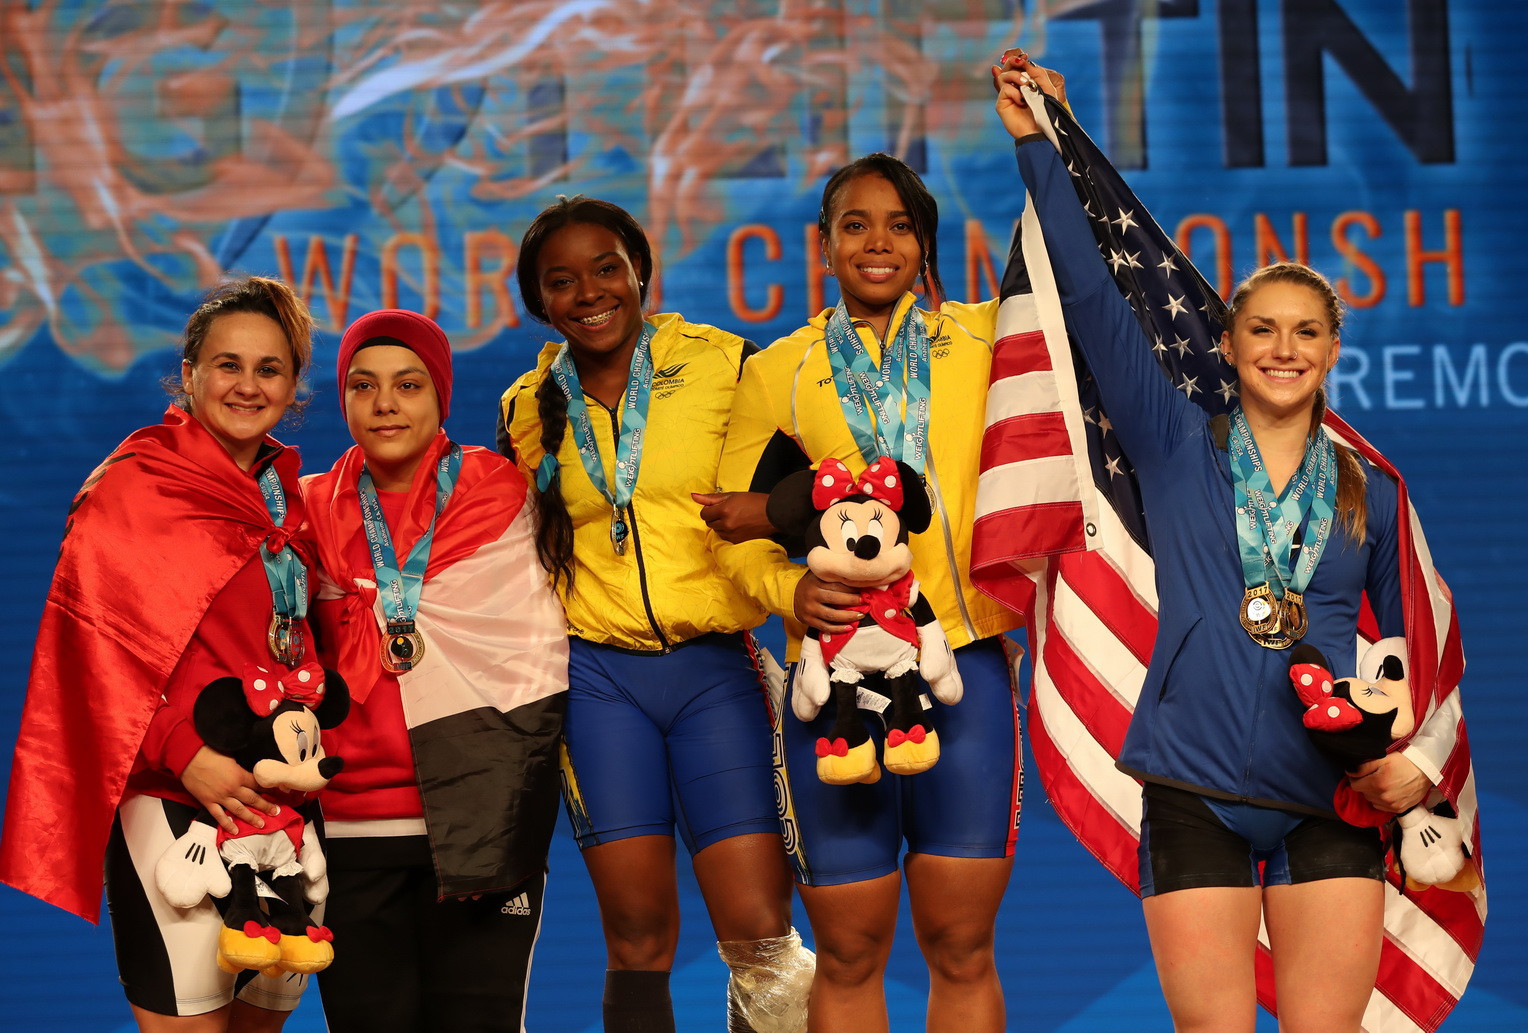 Egypt's Sara Samir Elsayed Mohamed Ahmed, second from left, and Colombia's Miyareth Mendoza Carabali, third from left, also medalled with clean and jerk gold and snatch silver respectively ©IWF